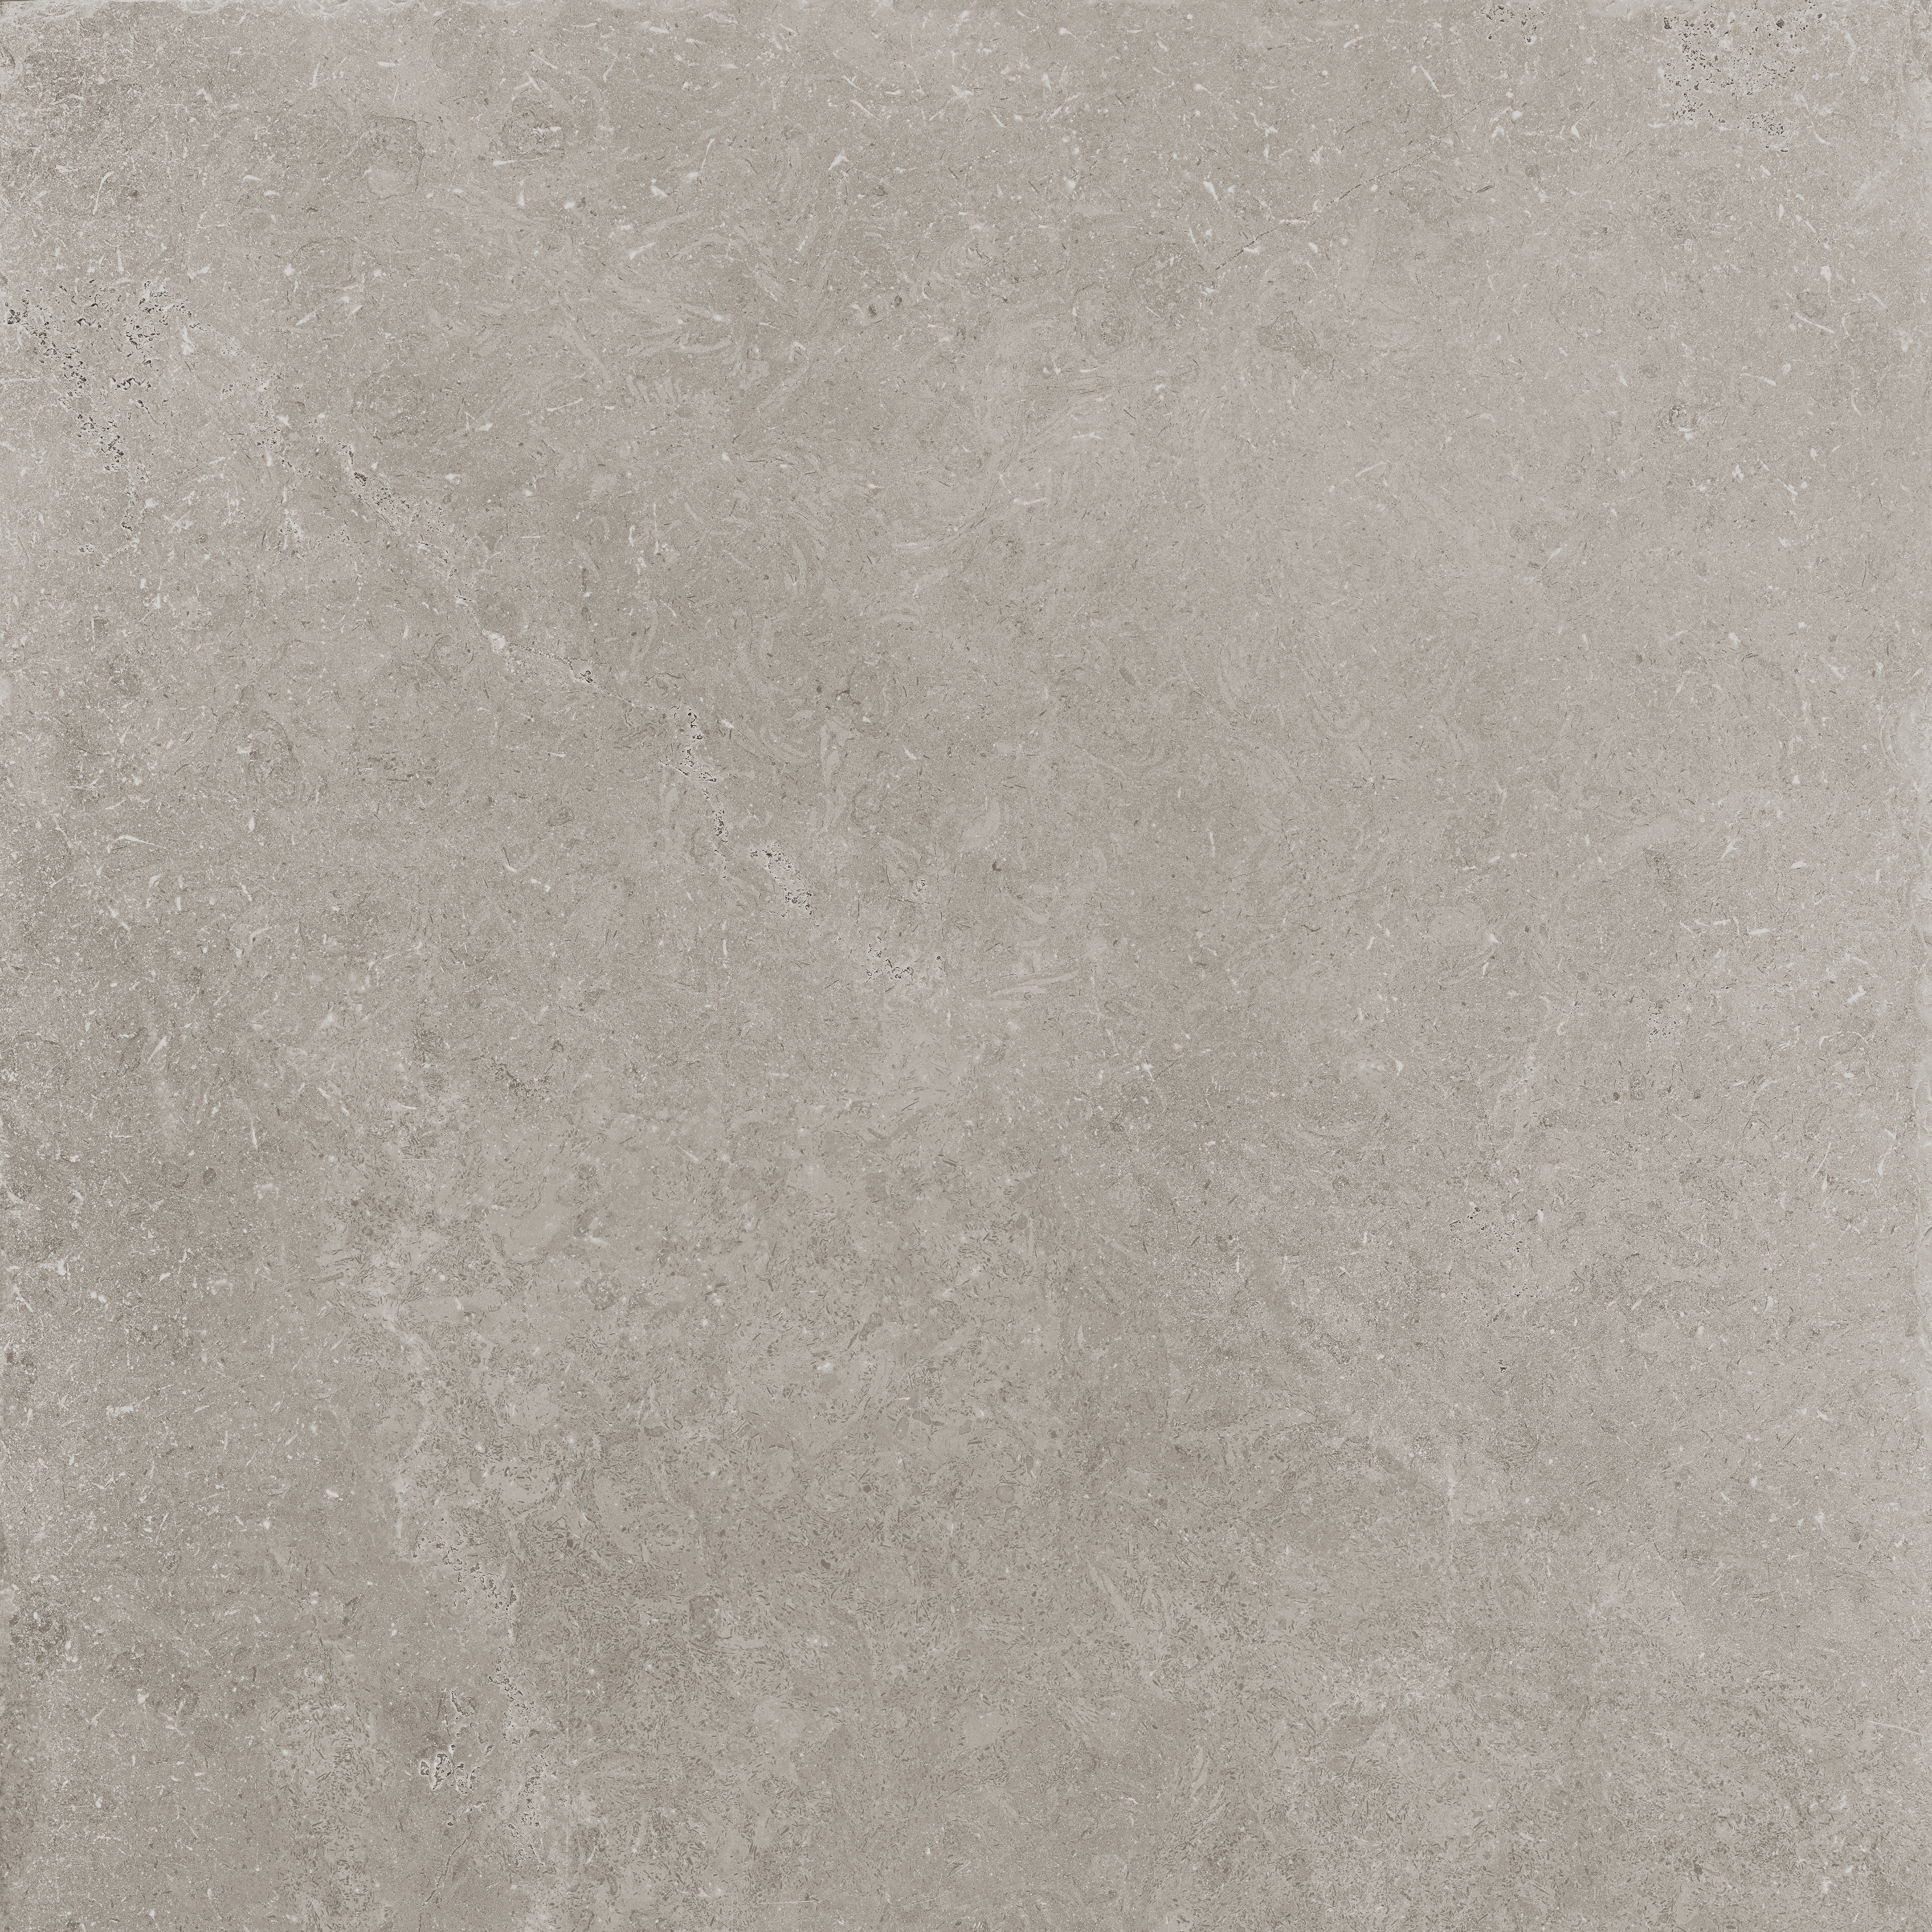 Panaria Prime Stone Silver Prime Antibacterial - Soft PGGPM20 90x90cm rectified 9,5mm